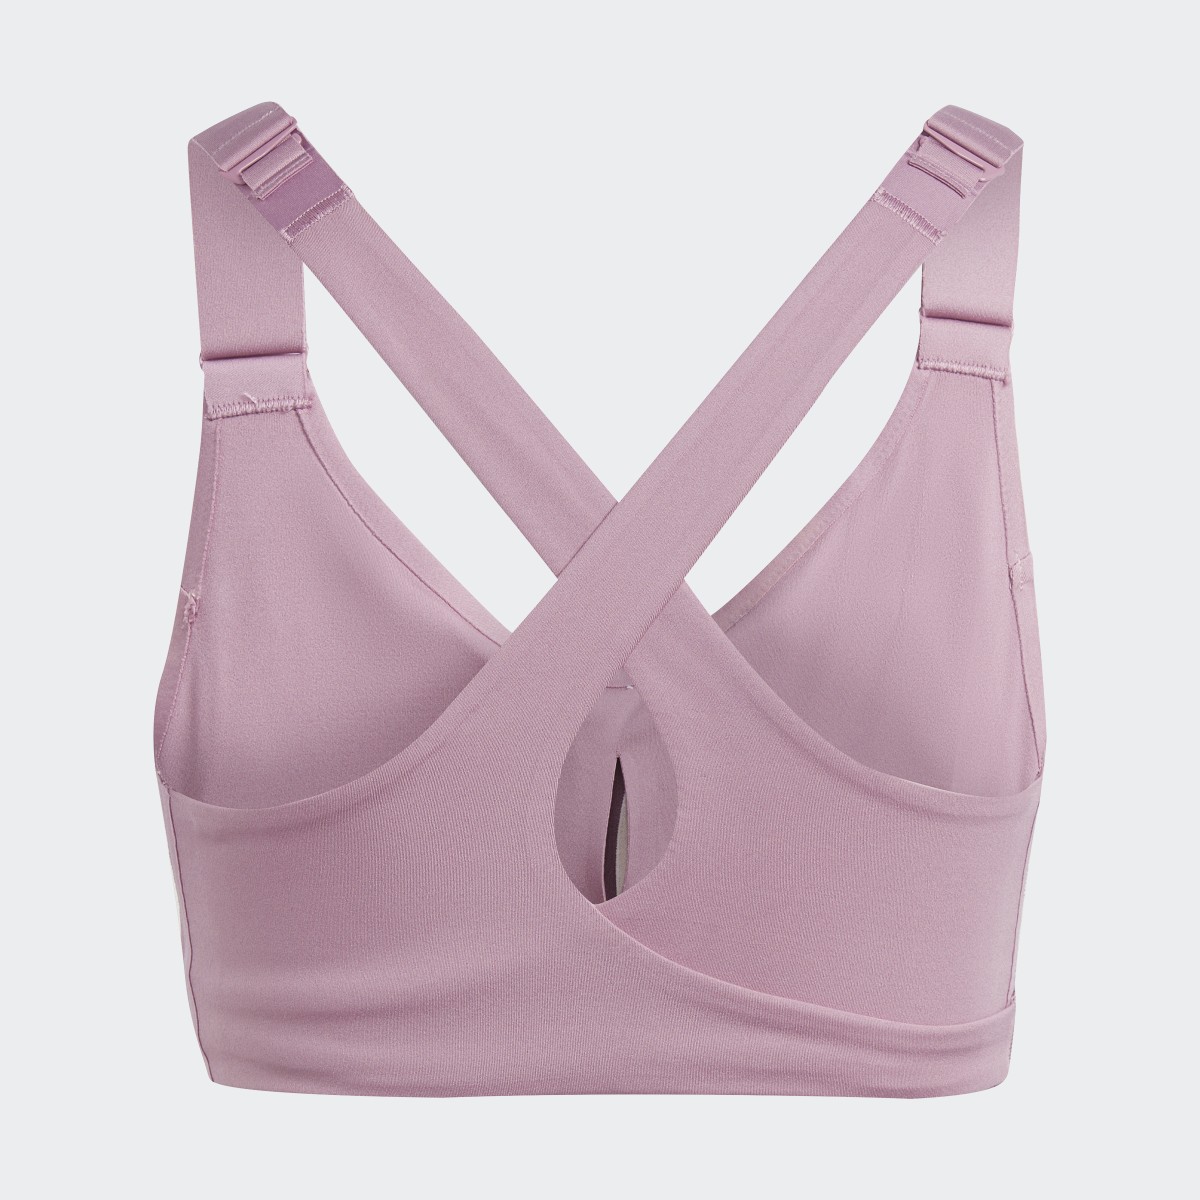 Adidas Brassière Collective Power Fastimpact Luxe Maintien fort. 6